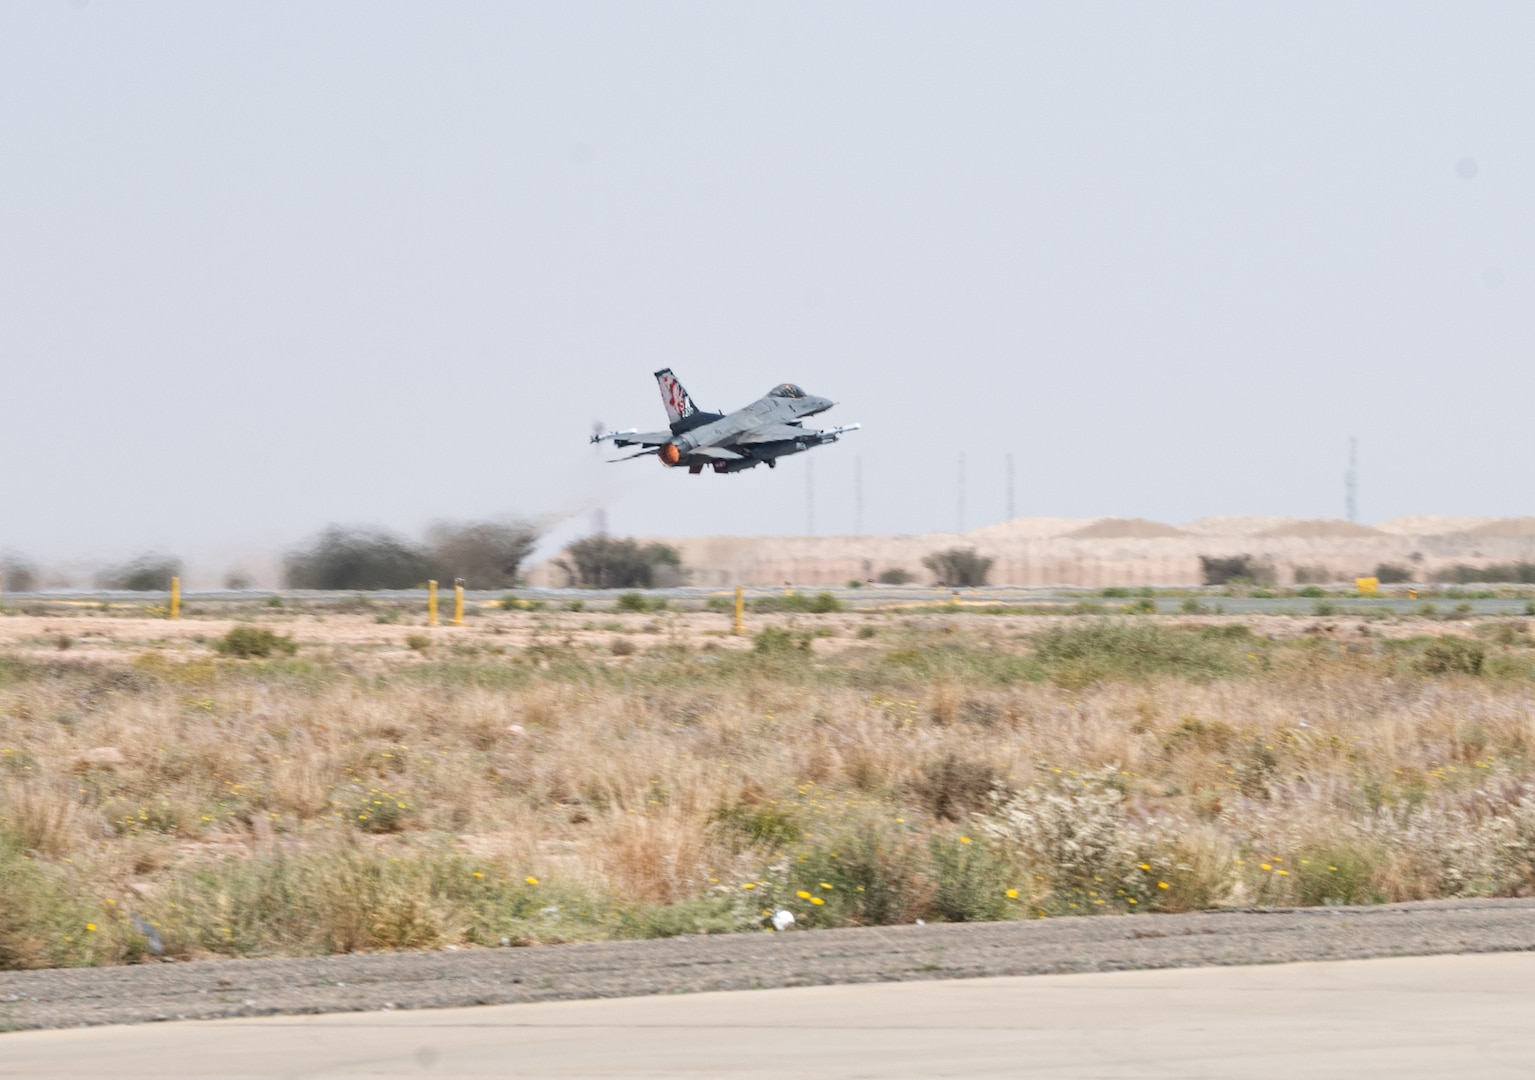 An F-16 Fighting Falcon, assigned to the 77th Expeditionary Fighter Squadron, takes off during an Agile Combat Employment capstone event Feb. 27, 2021, at an airbase in the Kingdom of Saudi Arabia.